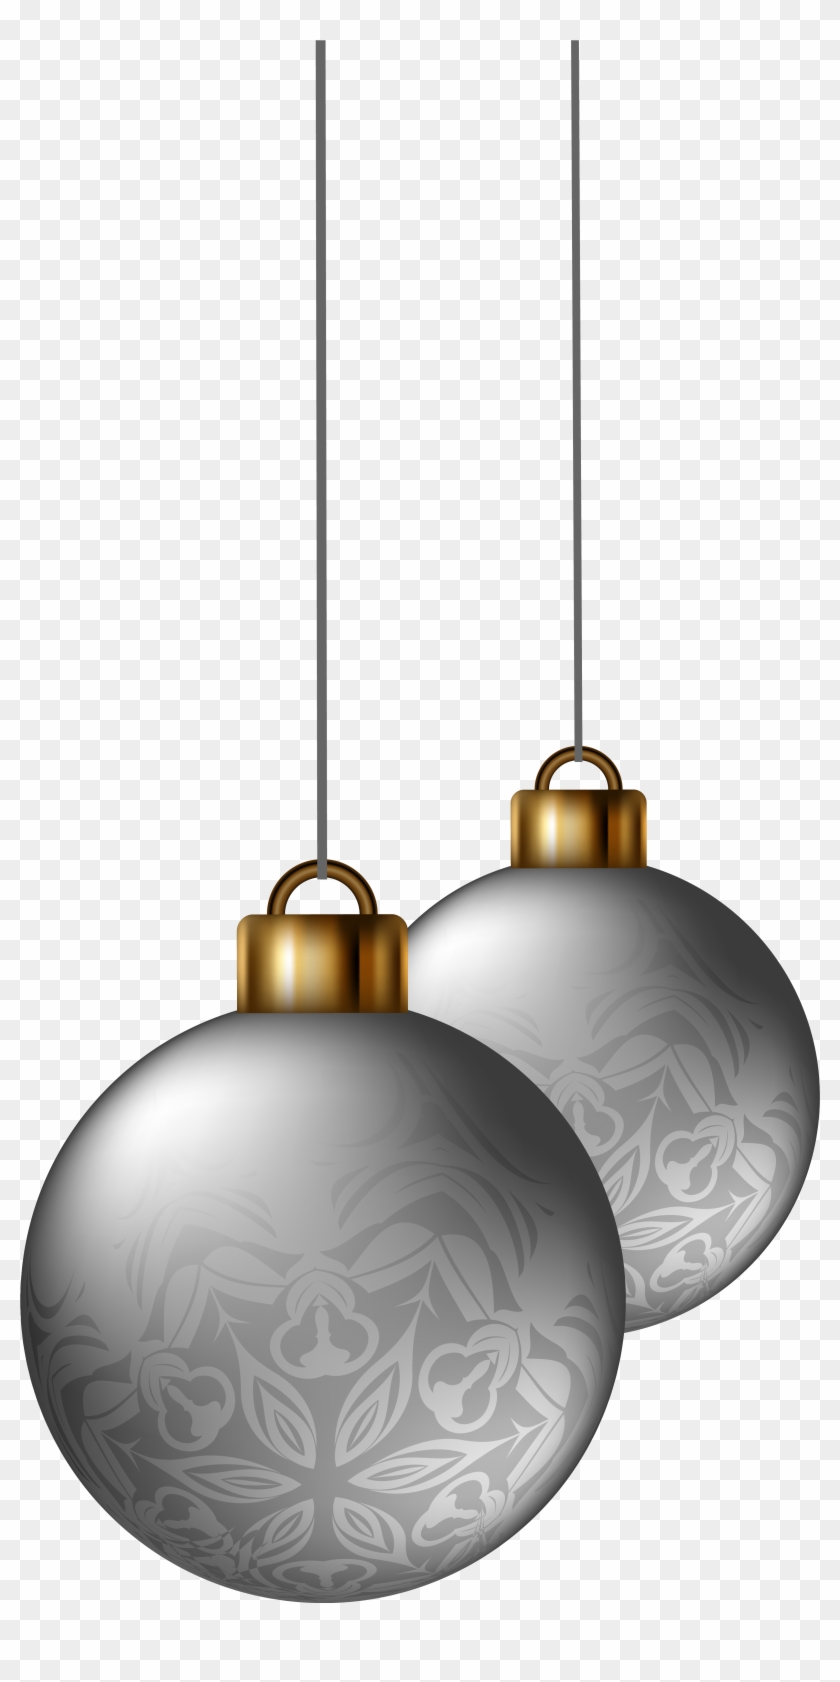 Silver Christmas Balls Png Clipart Image - Text #529944